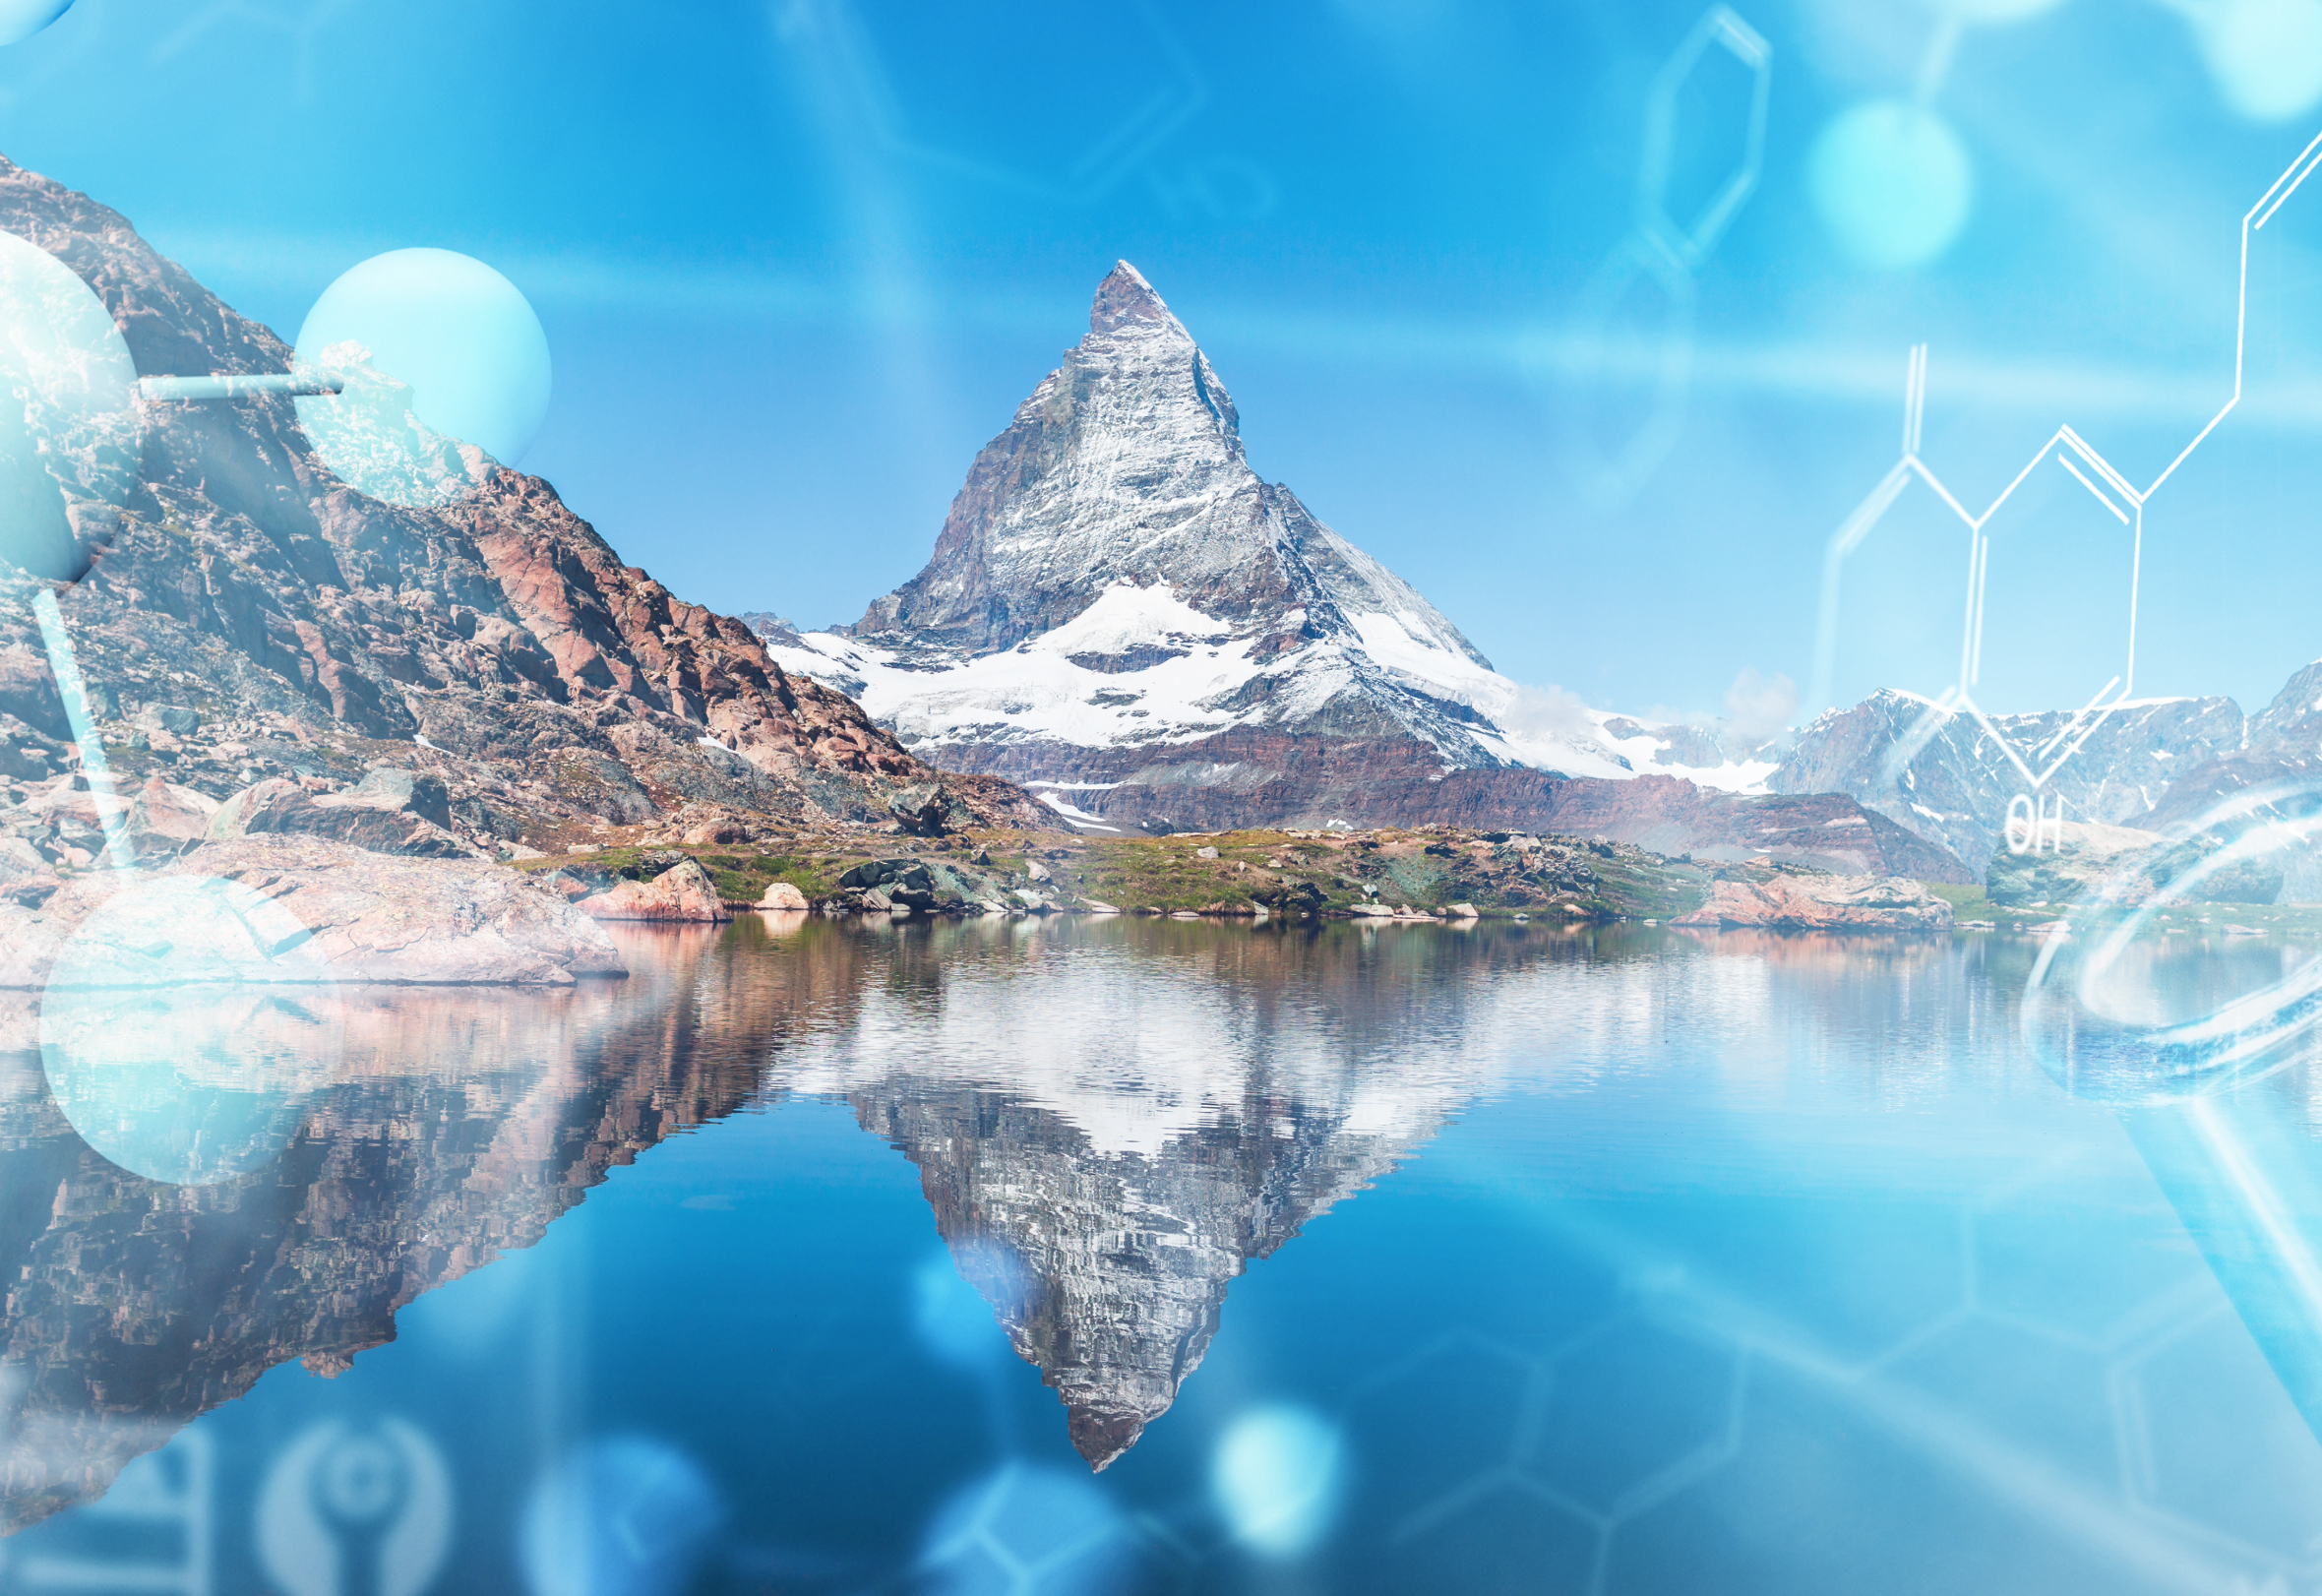 For decades, the canton of Valais has cultivated a reputation for excellence in the chemical and pharmaceutical industries, combining innovation with economic growth.